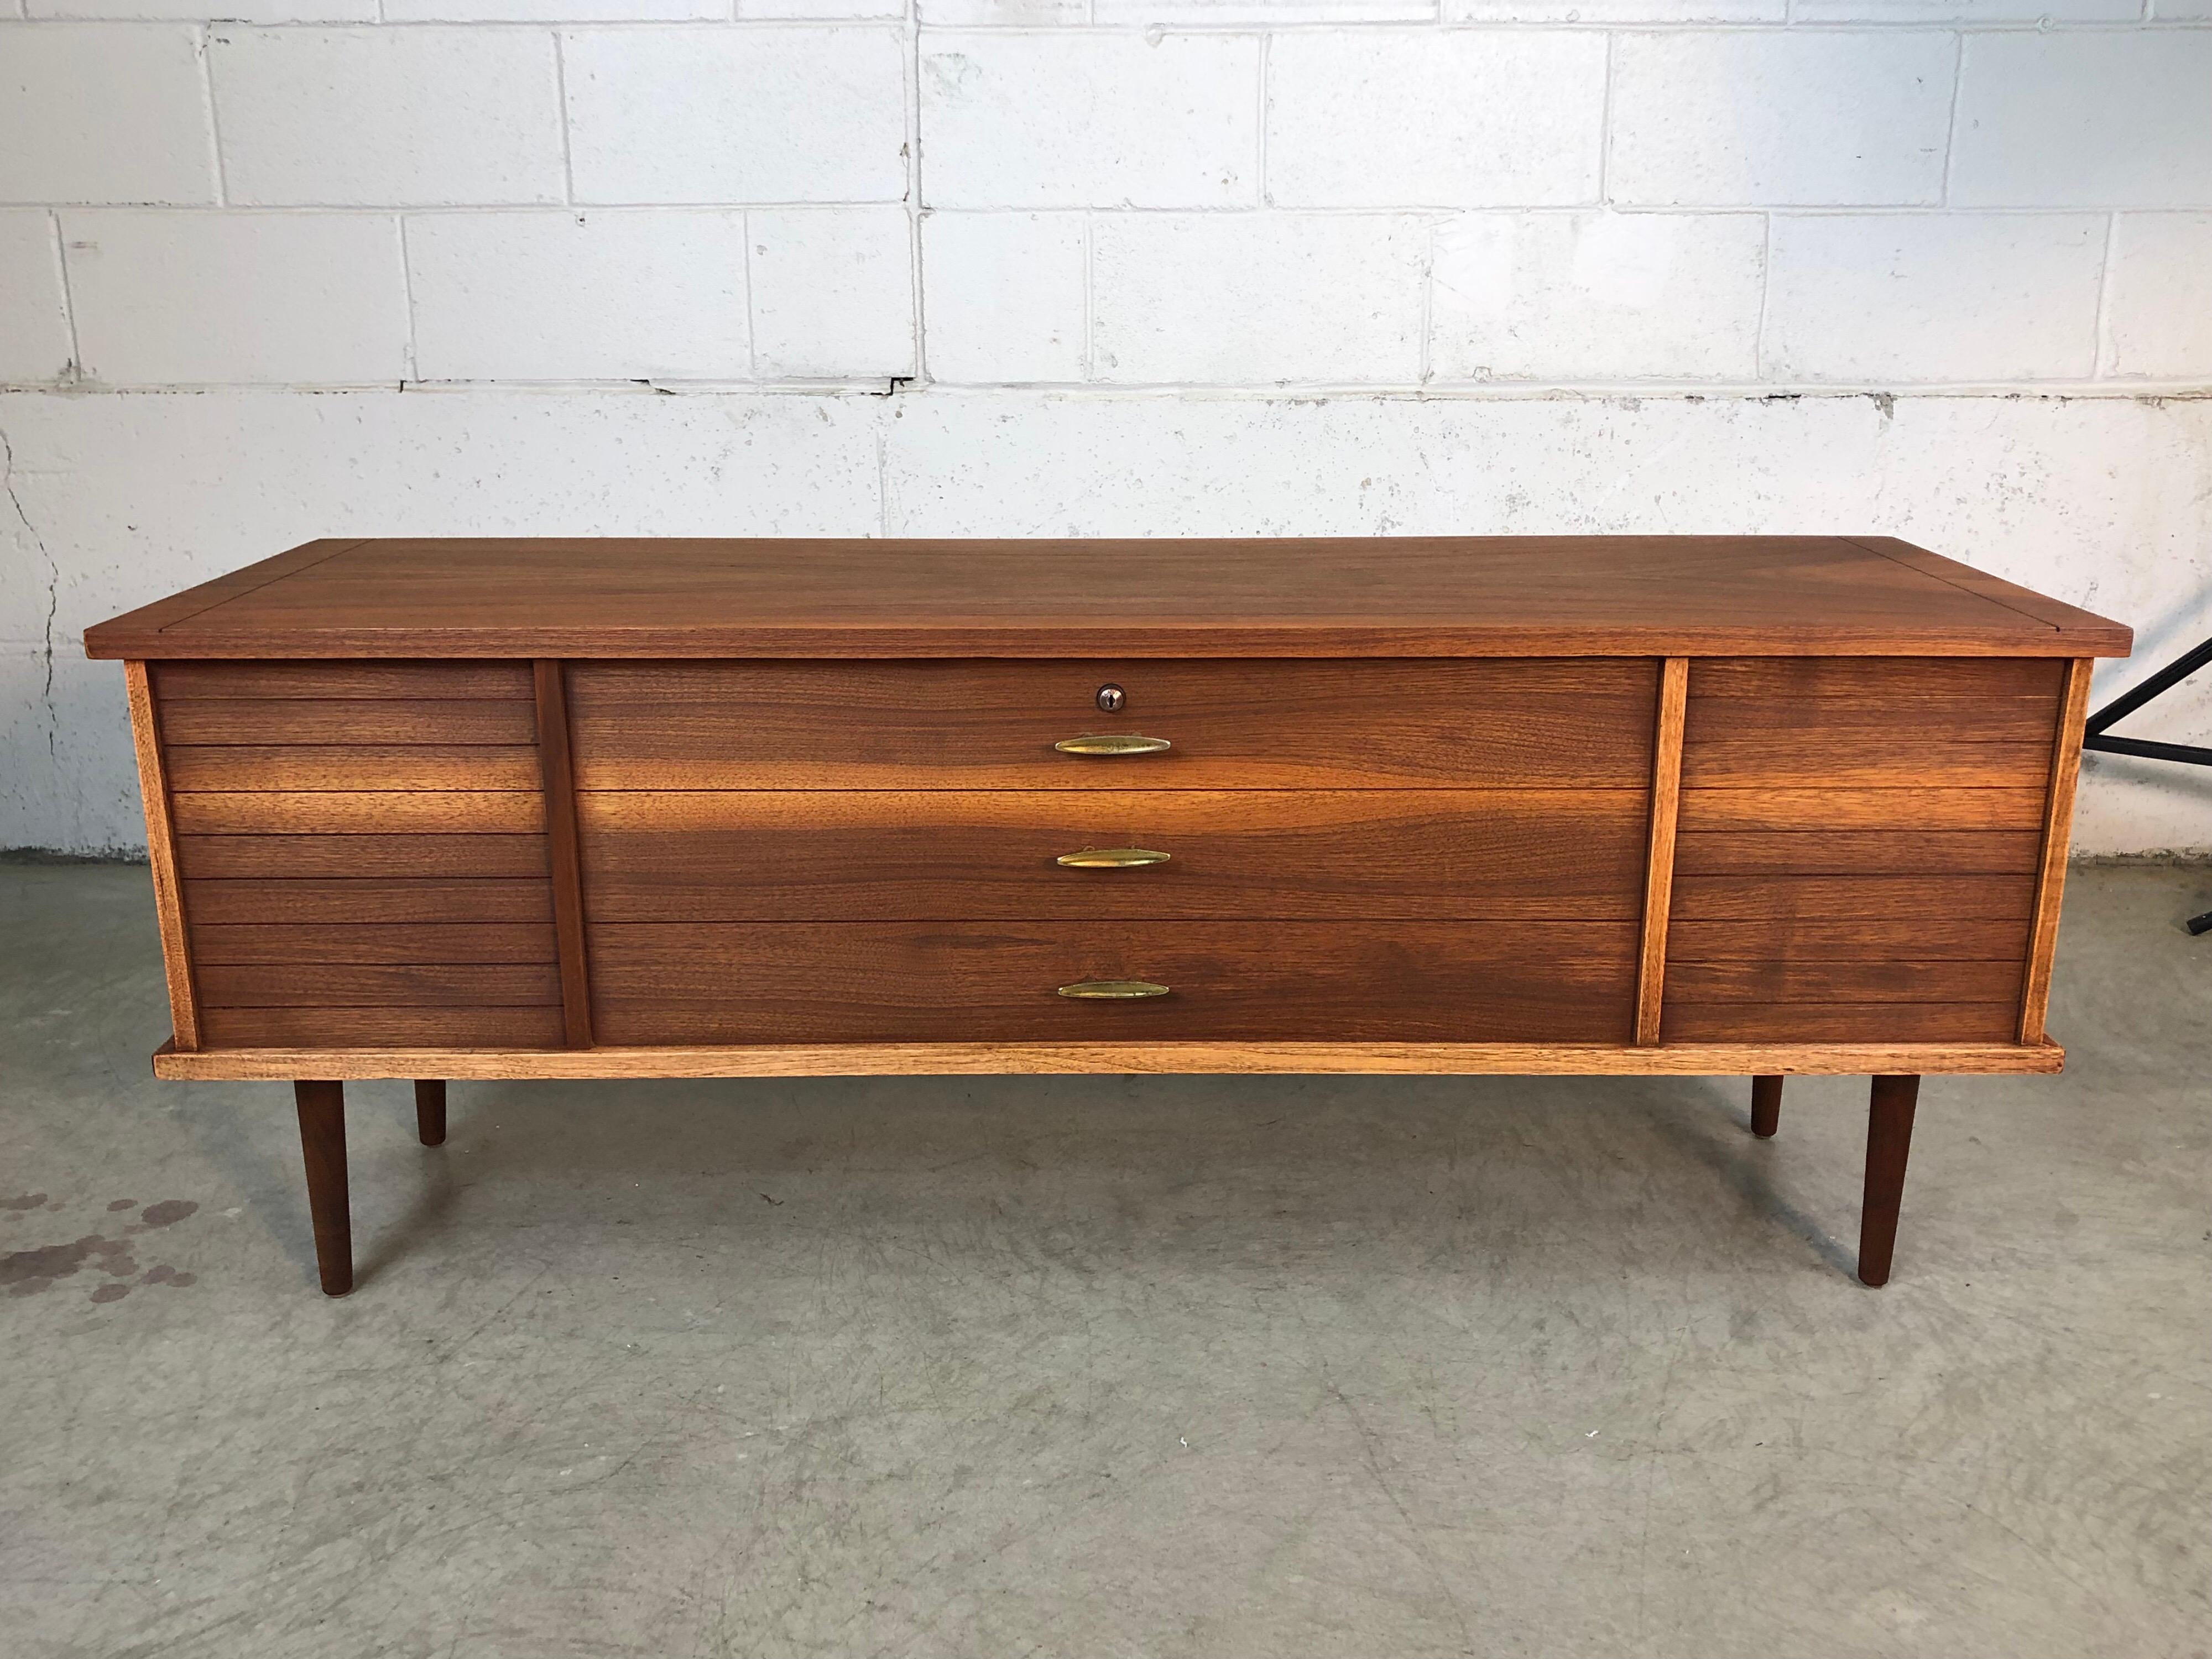 Vintage 1960s walnut wood cedar chest by Lane Furniture Co. The chest has round legs and faux brass pulls. It is lined with cedar wood and marked inside. The chest has been fully restored. The chest is compact and will fit into a small space.